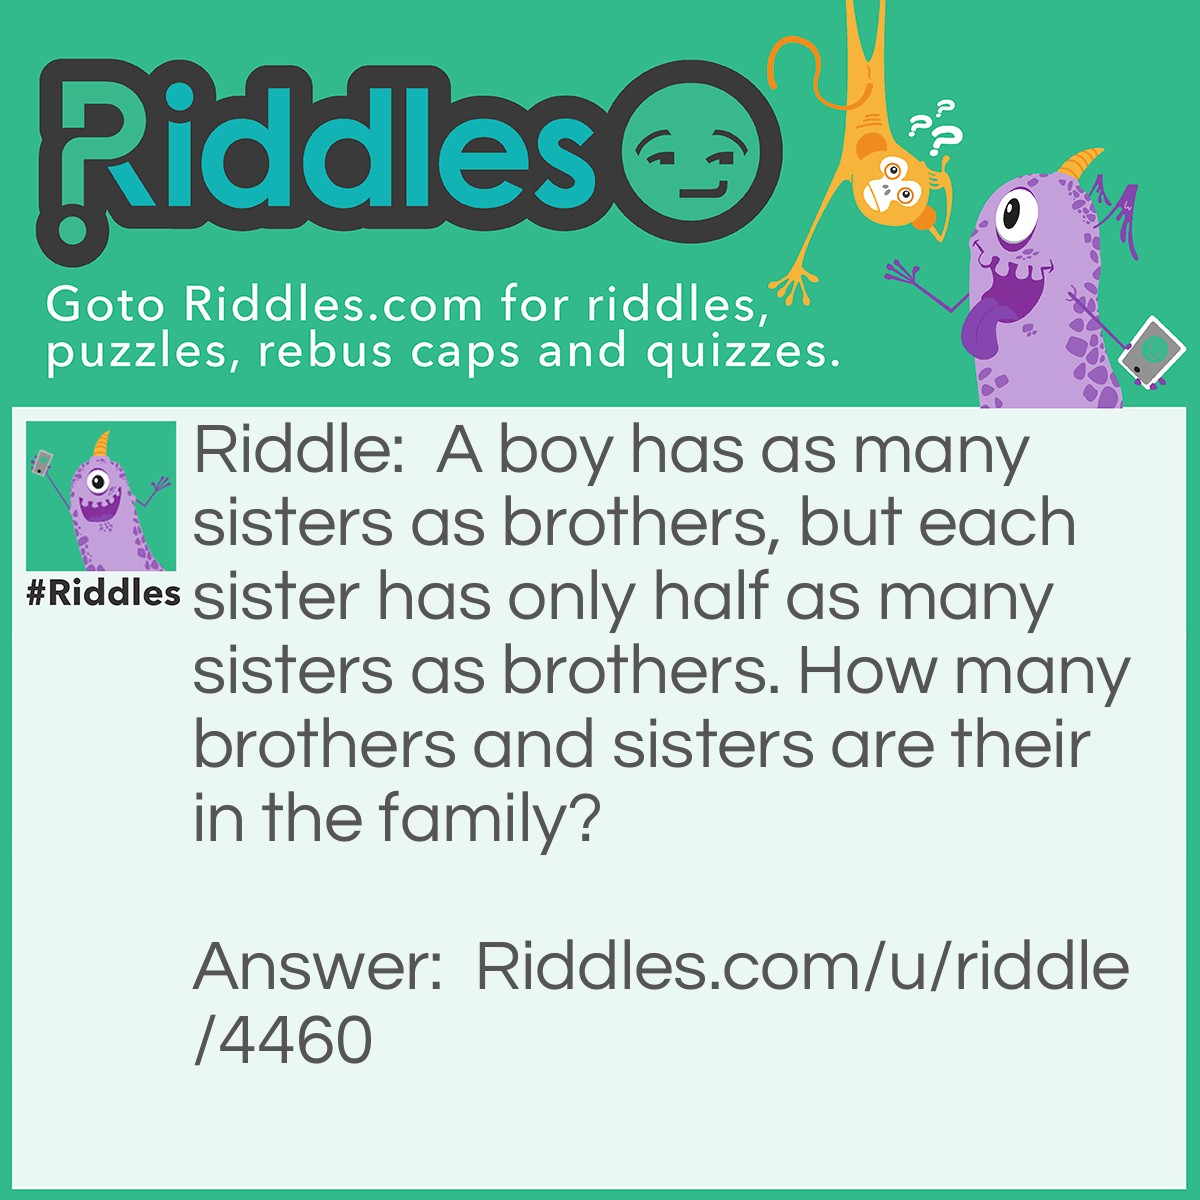 Riddle: A boy has as many sisters as brothers, but each sister has only half as many sisters as brothers. How many brothers and sisters are their in the family? Answer: 4 Brothers & 3 Sisters.